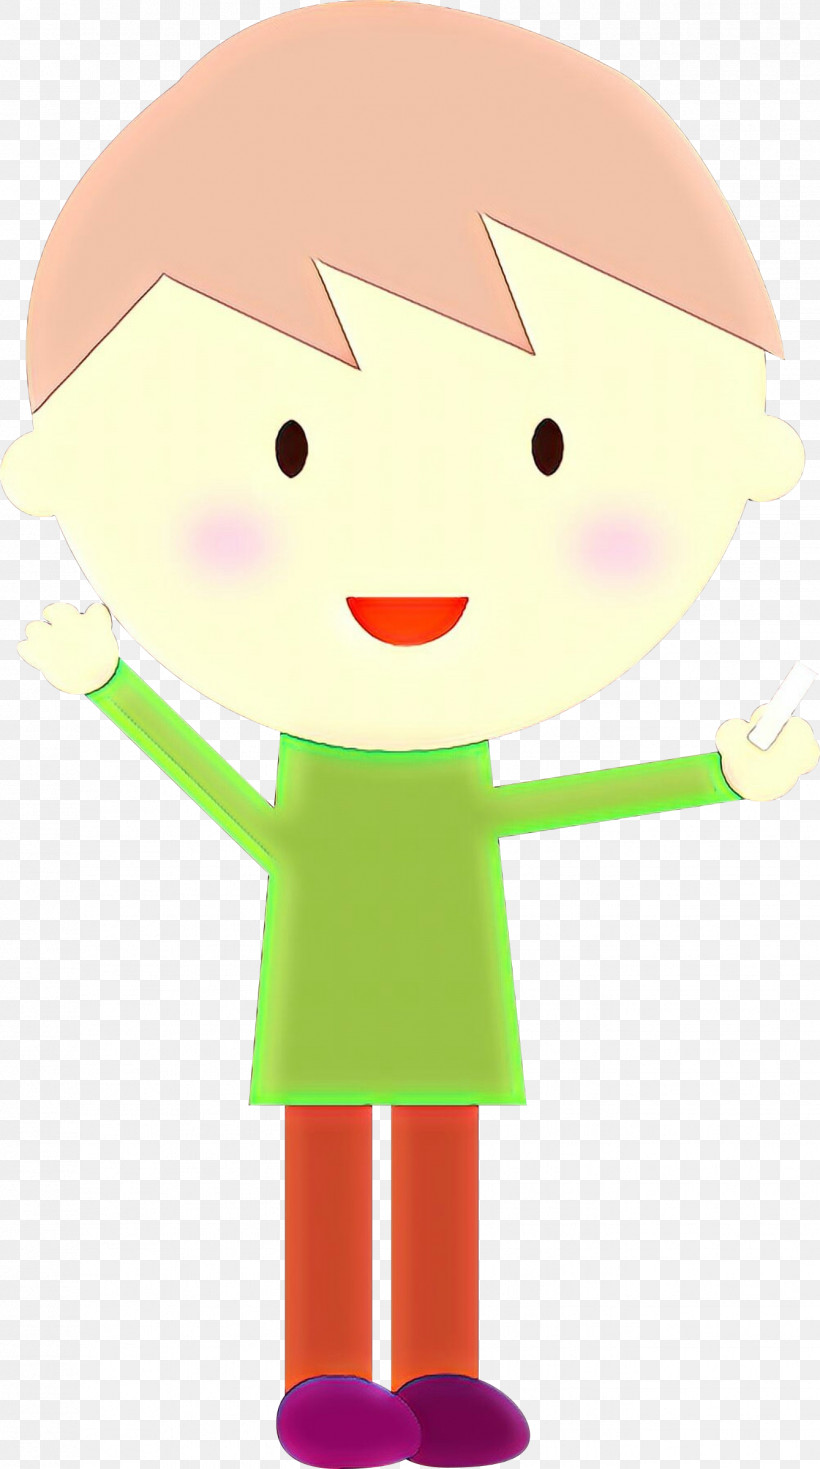 Cartoon Green Smile, PNG, 1339x2400px, Cartoon, Green, Smile Download Free